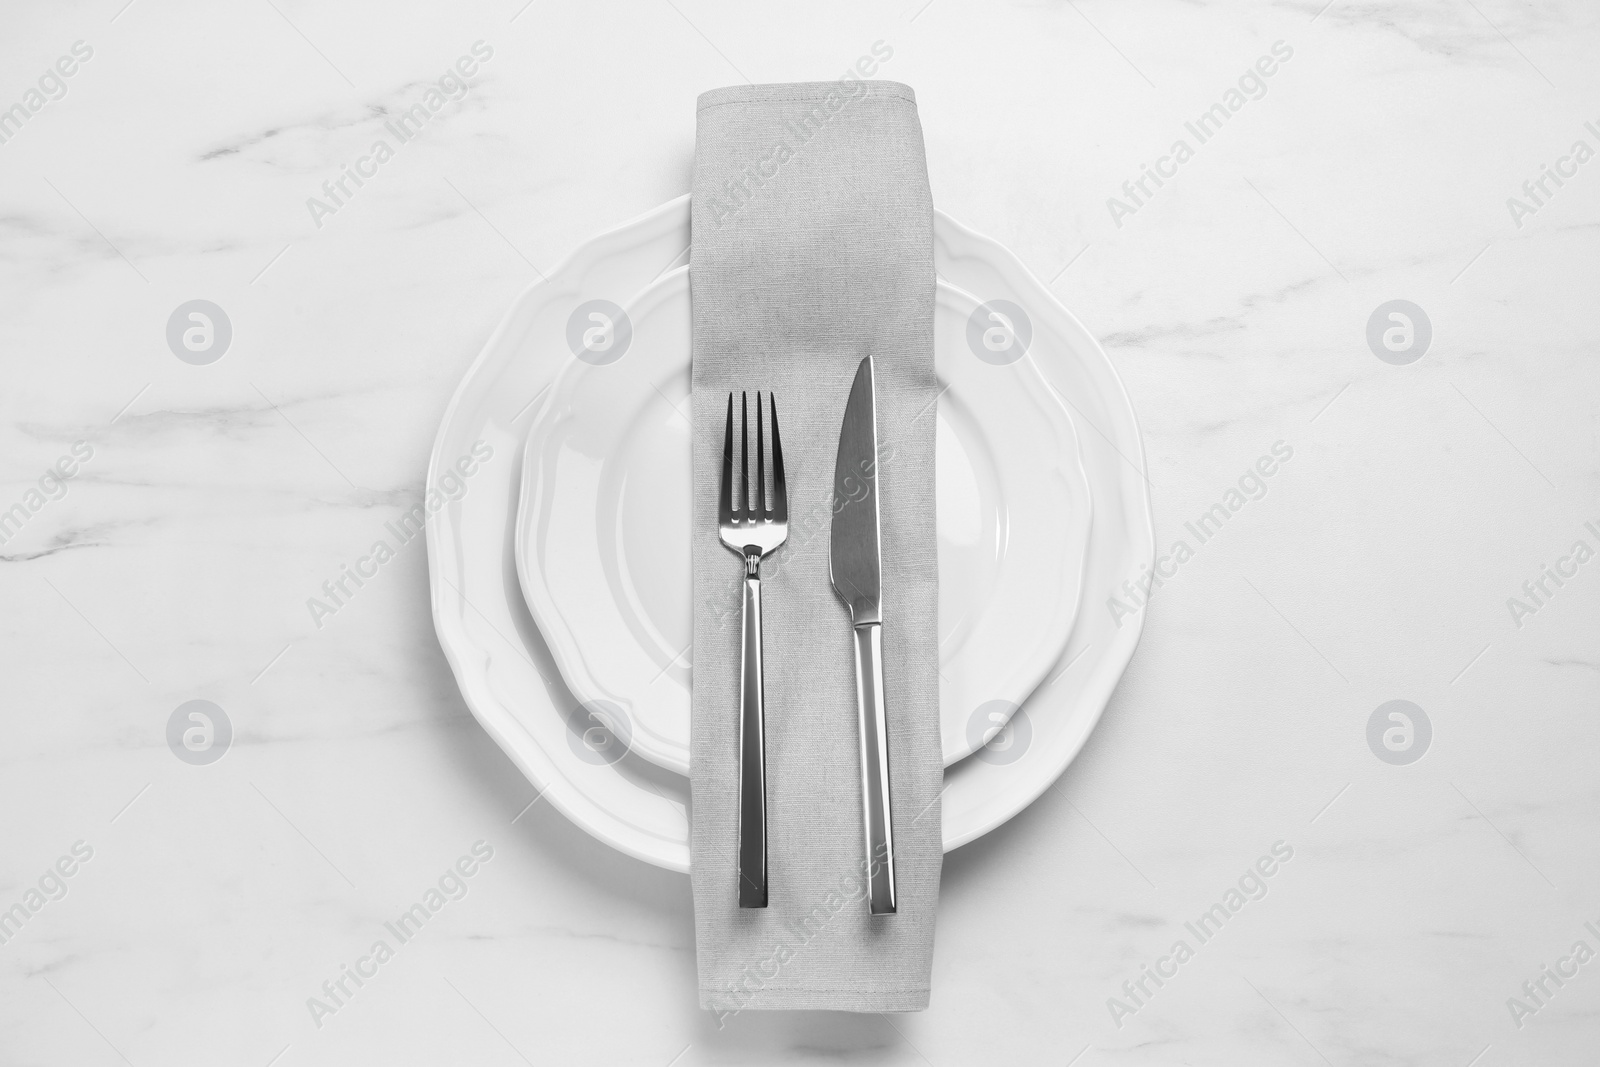 Photo of Clean plates with shiny silver cutlery on white marble table, flat lay